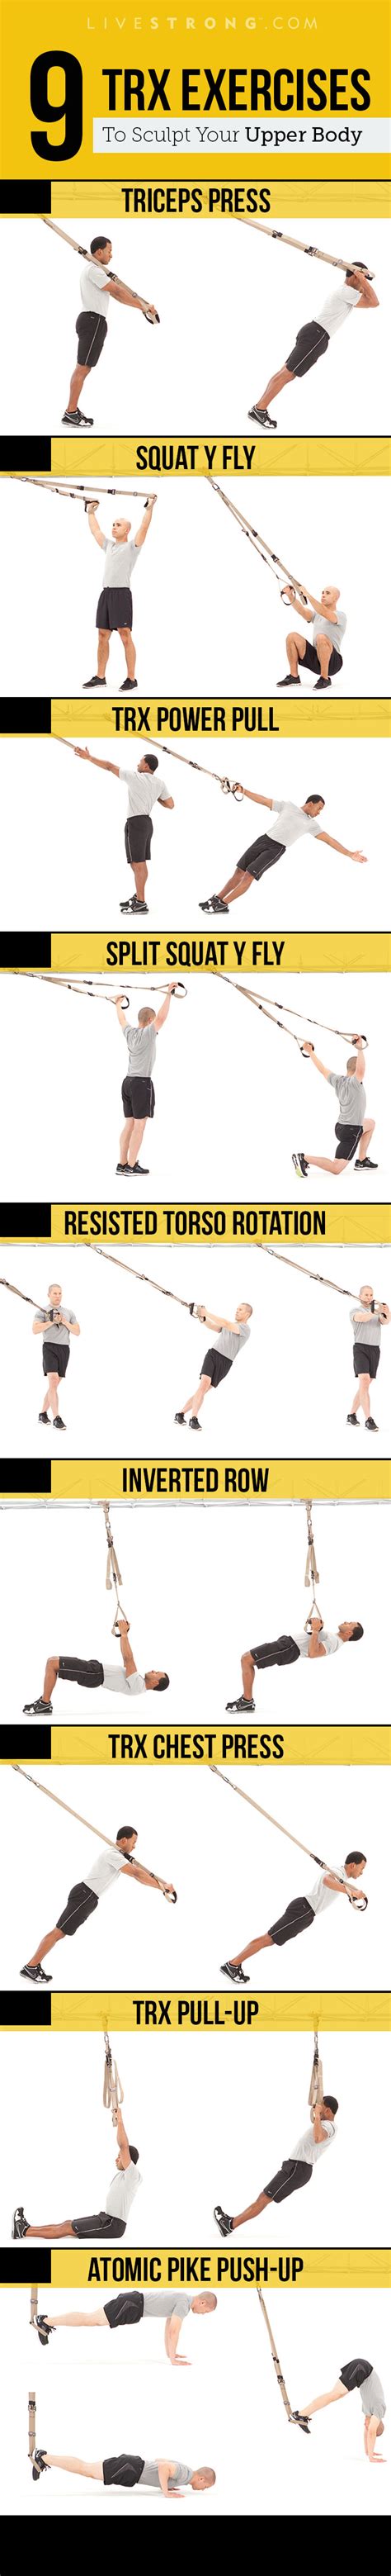 Trx force workout guide phase 1. - Property and casualty study guide new york.